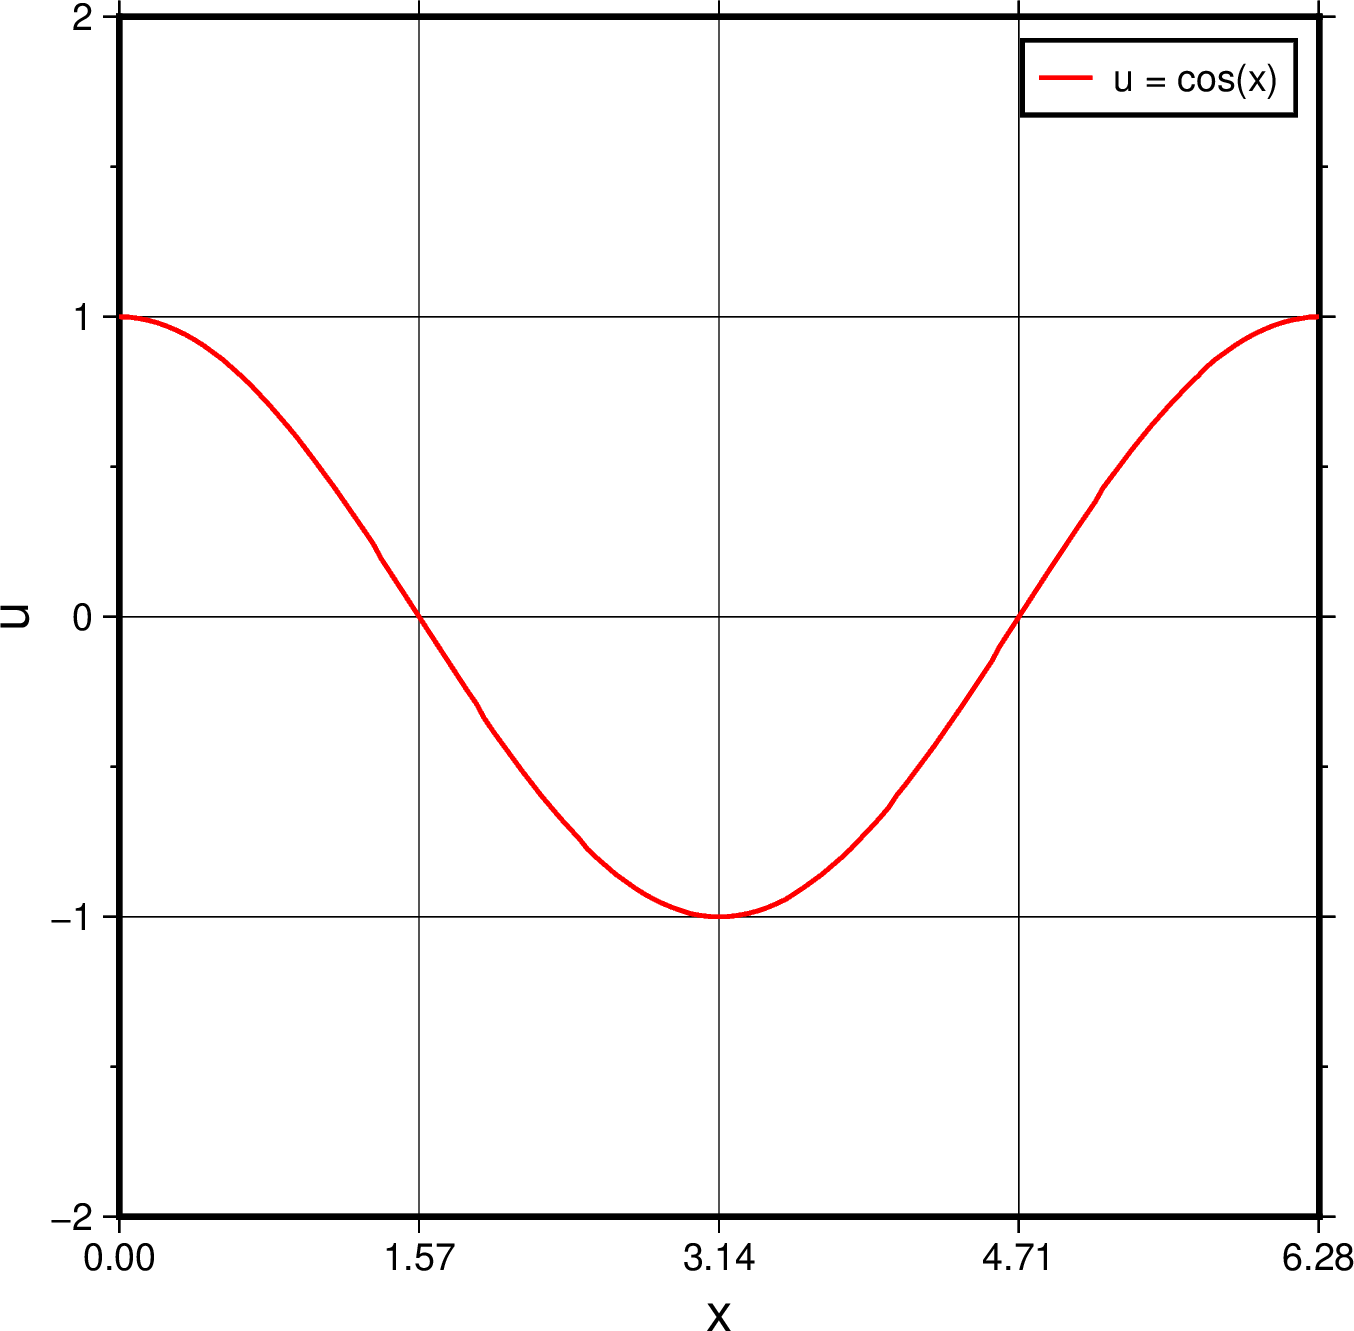 A cosine function with a red line